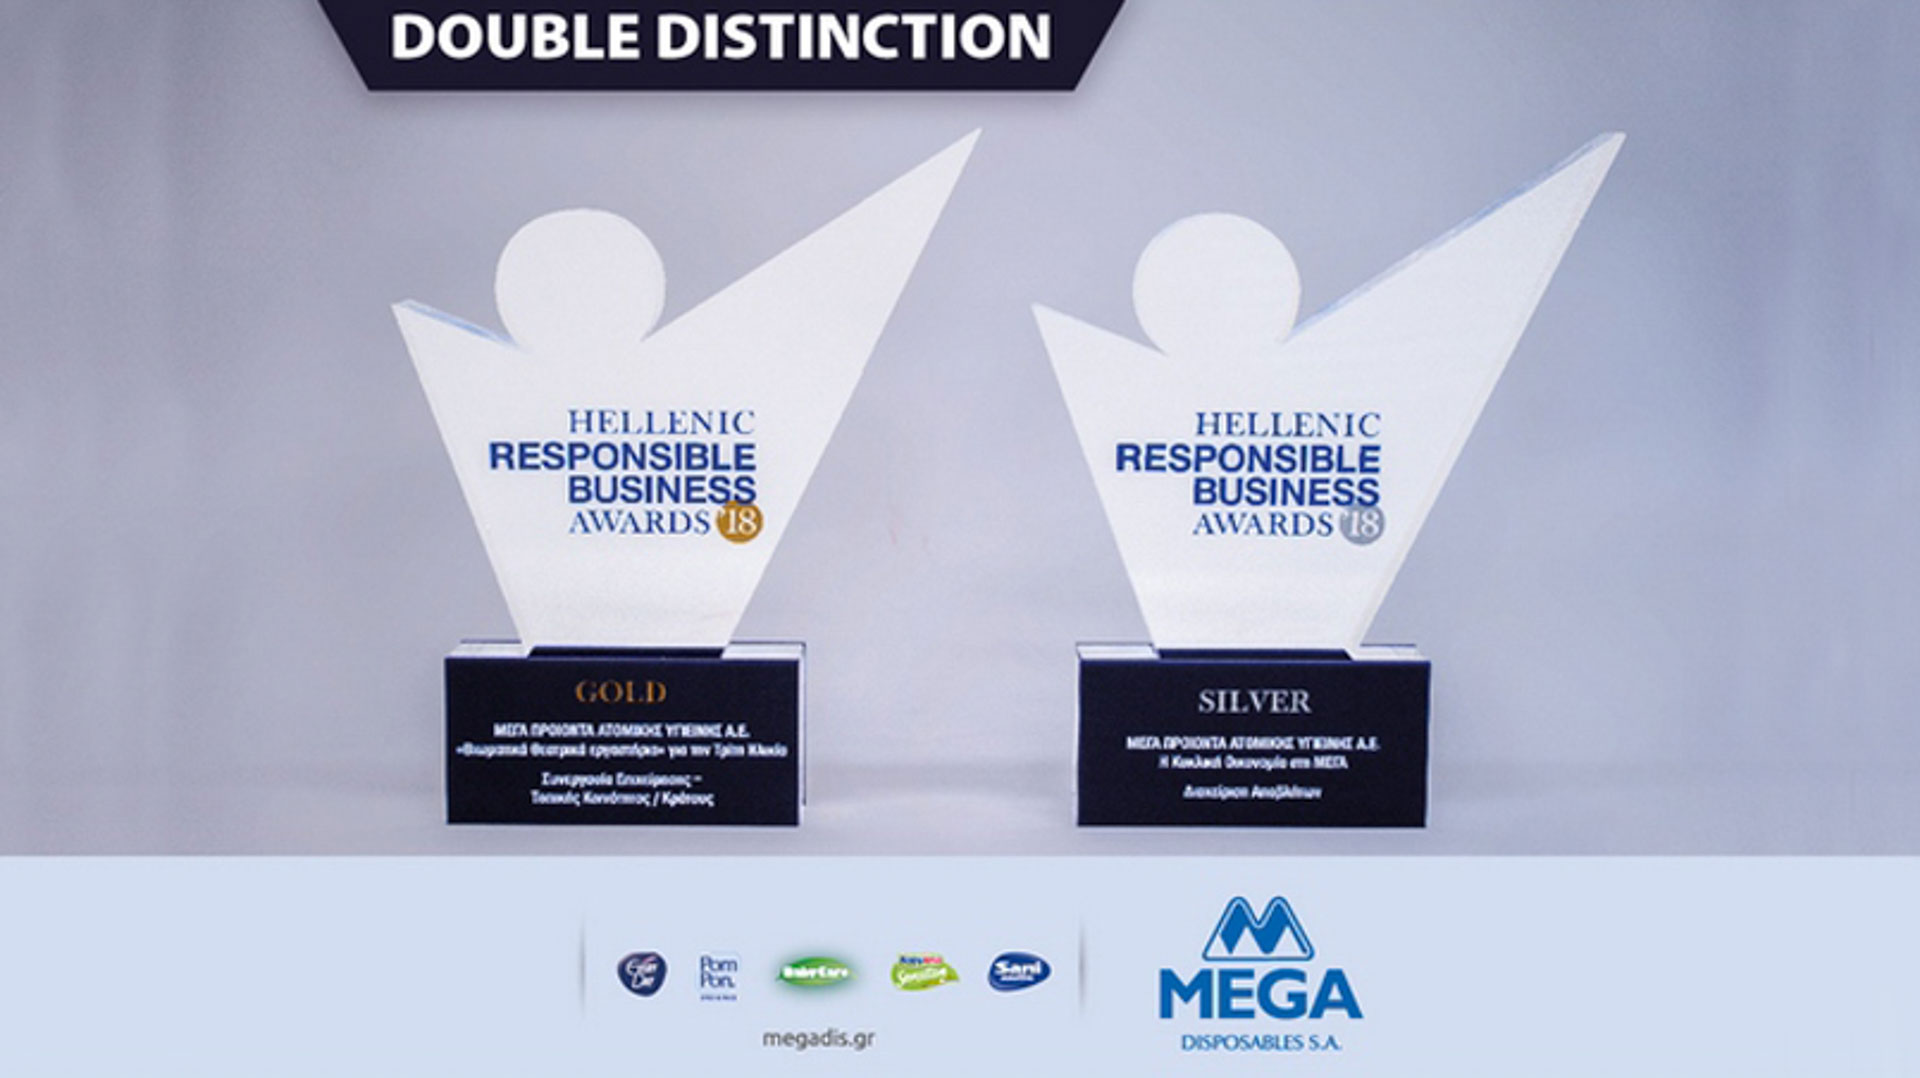 Double distinction for MEGA at Hellenic Responsible Business Awards 2018